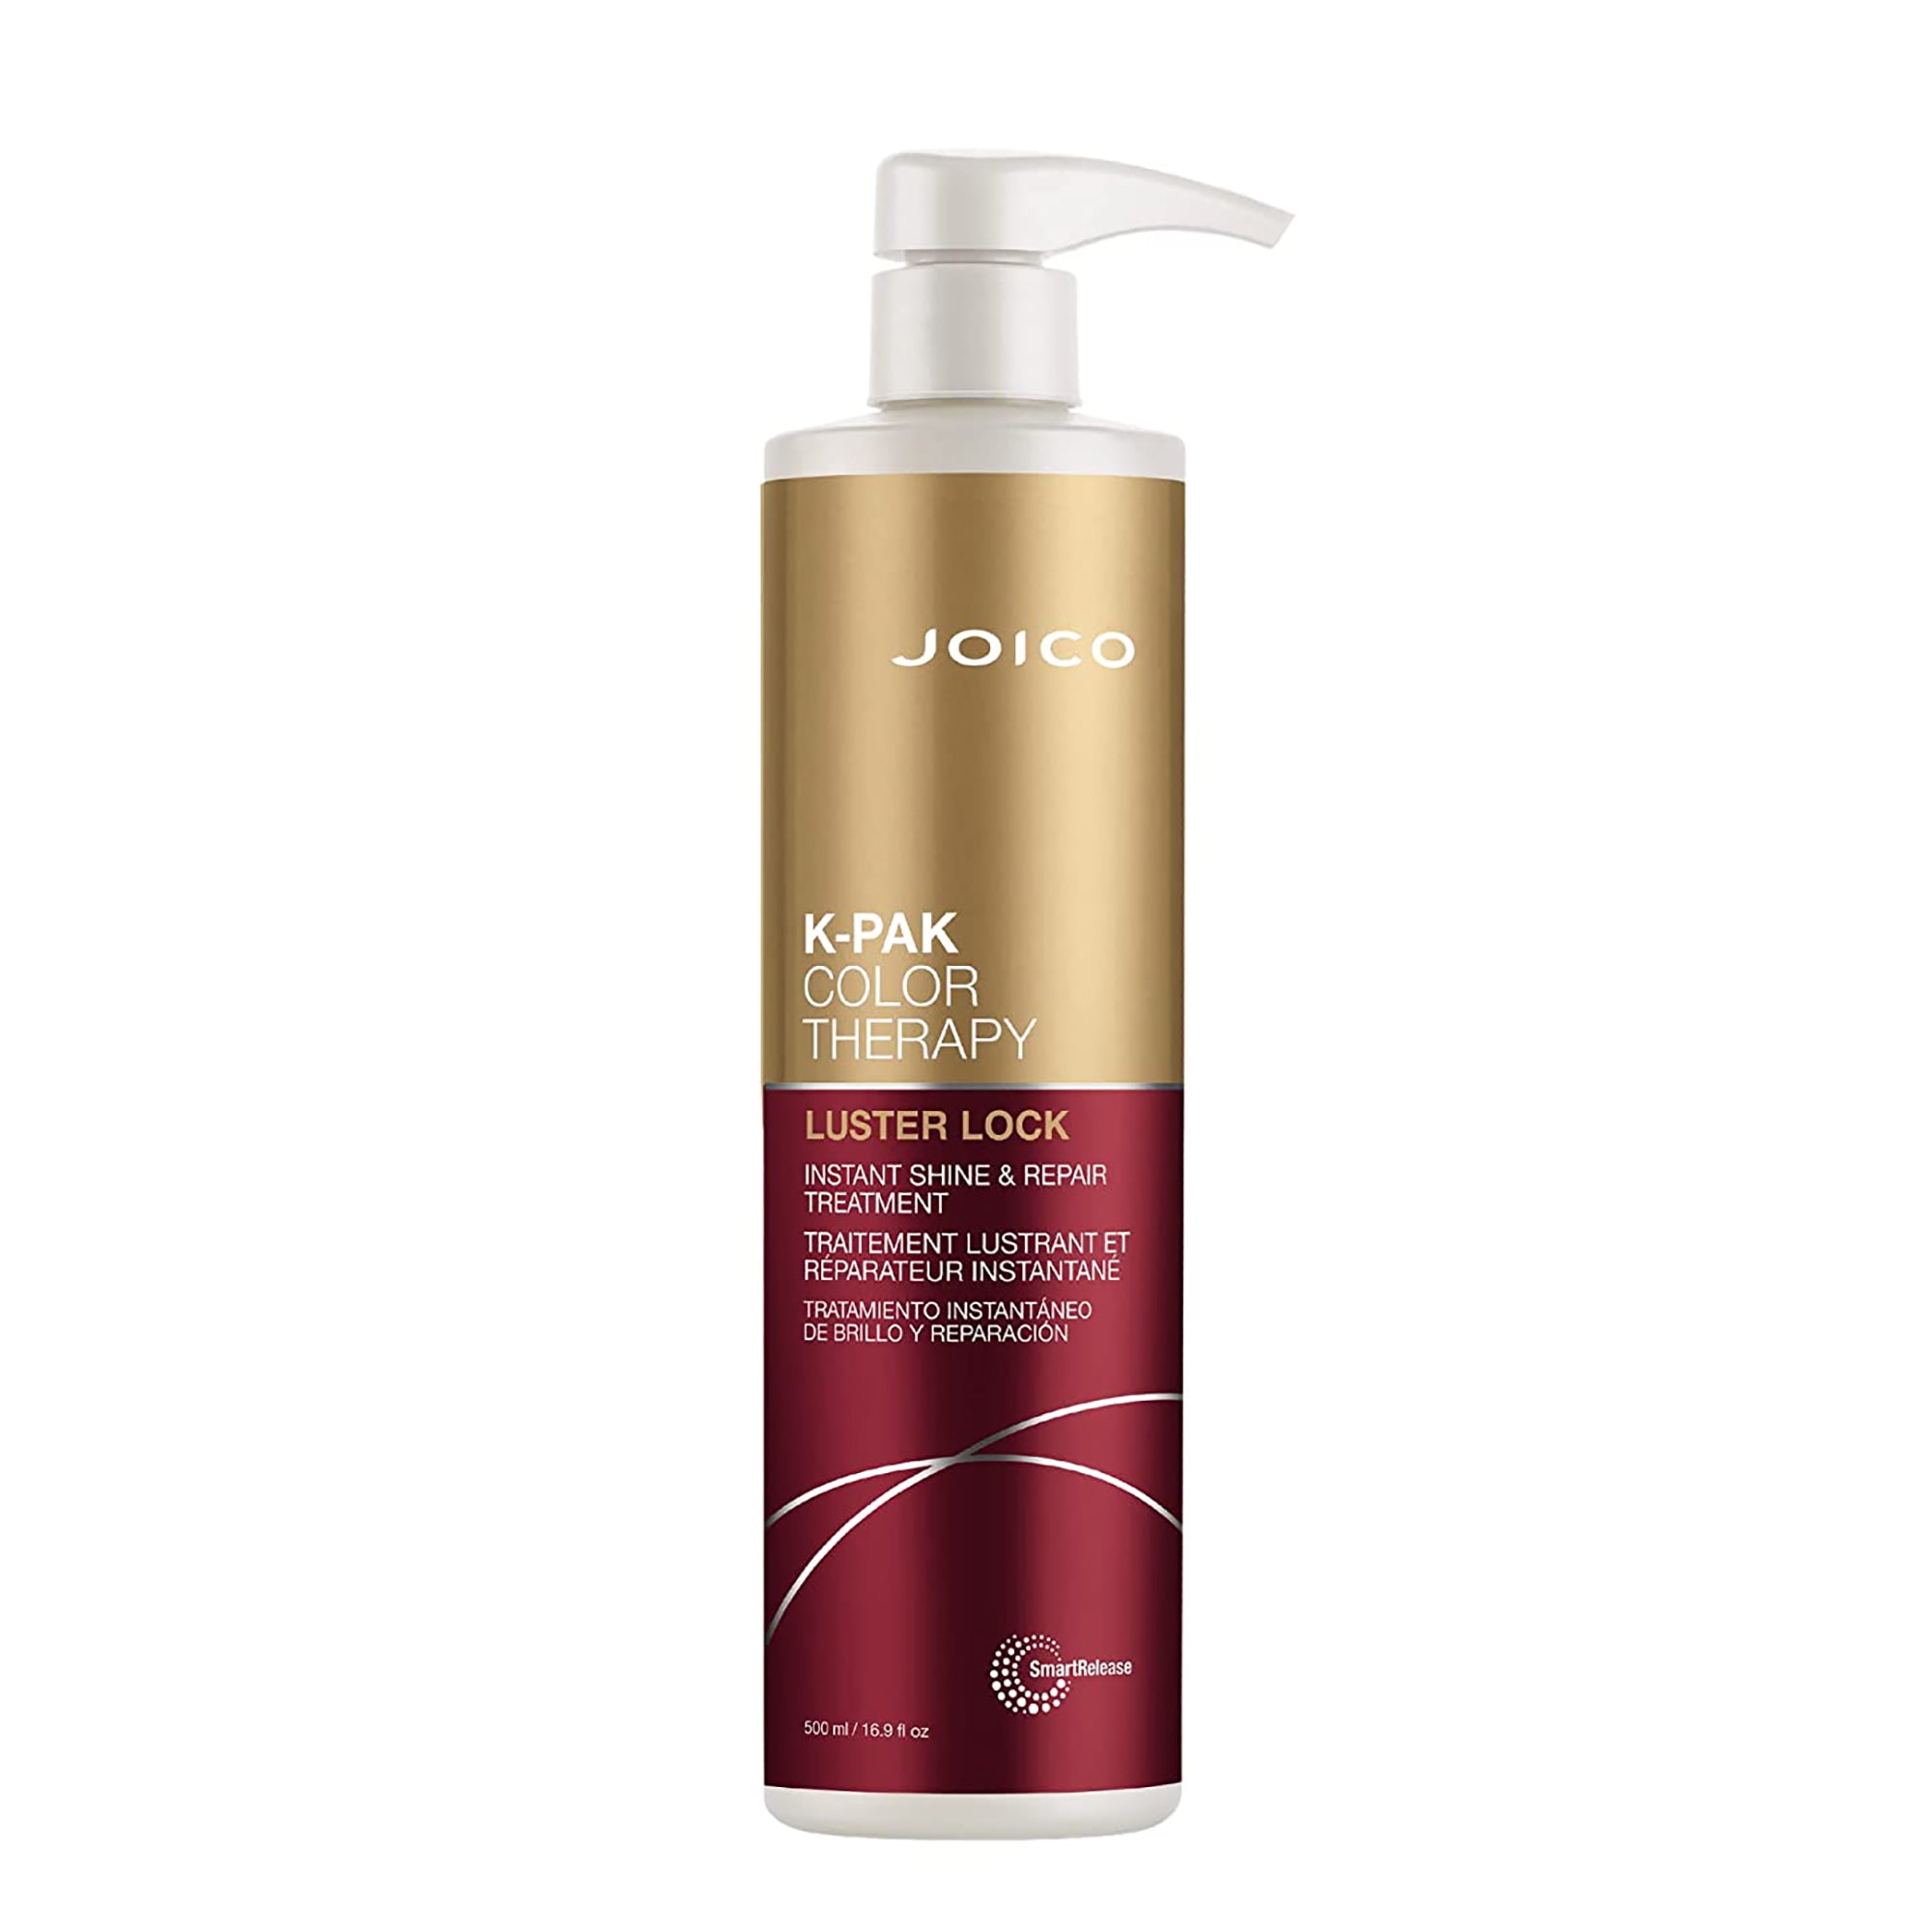 Joico K-PAK Color Therapy Luster Lock Instant Shine & Repair Treatment / 16.OZ